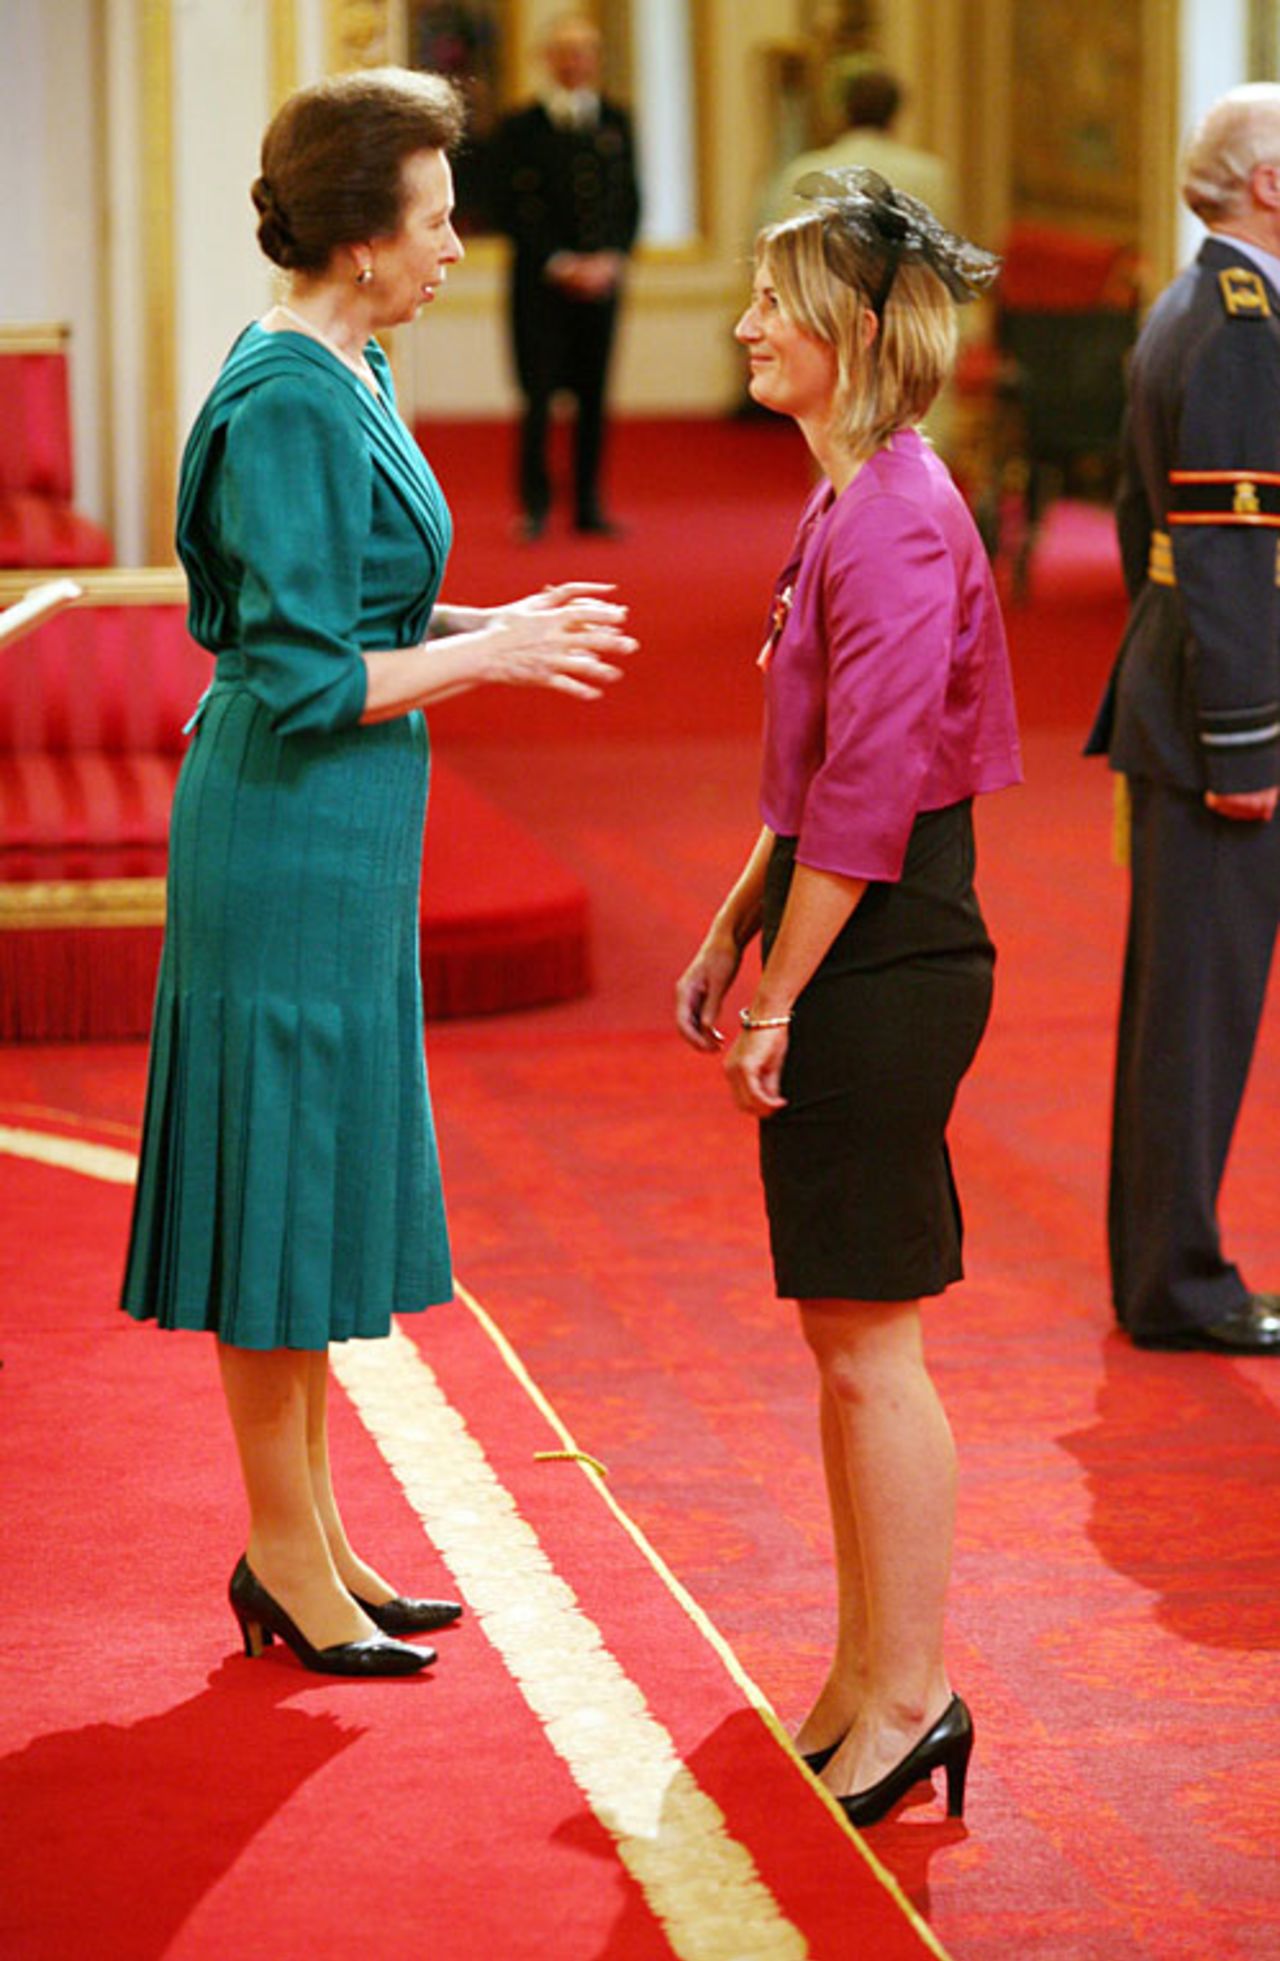 Charlotte Edwards, the England women's team captain, is made an MBE by the Princess Royal for services to sport, London, November 24, 2009